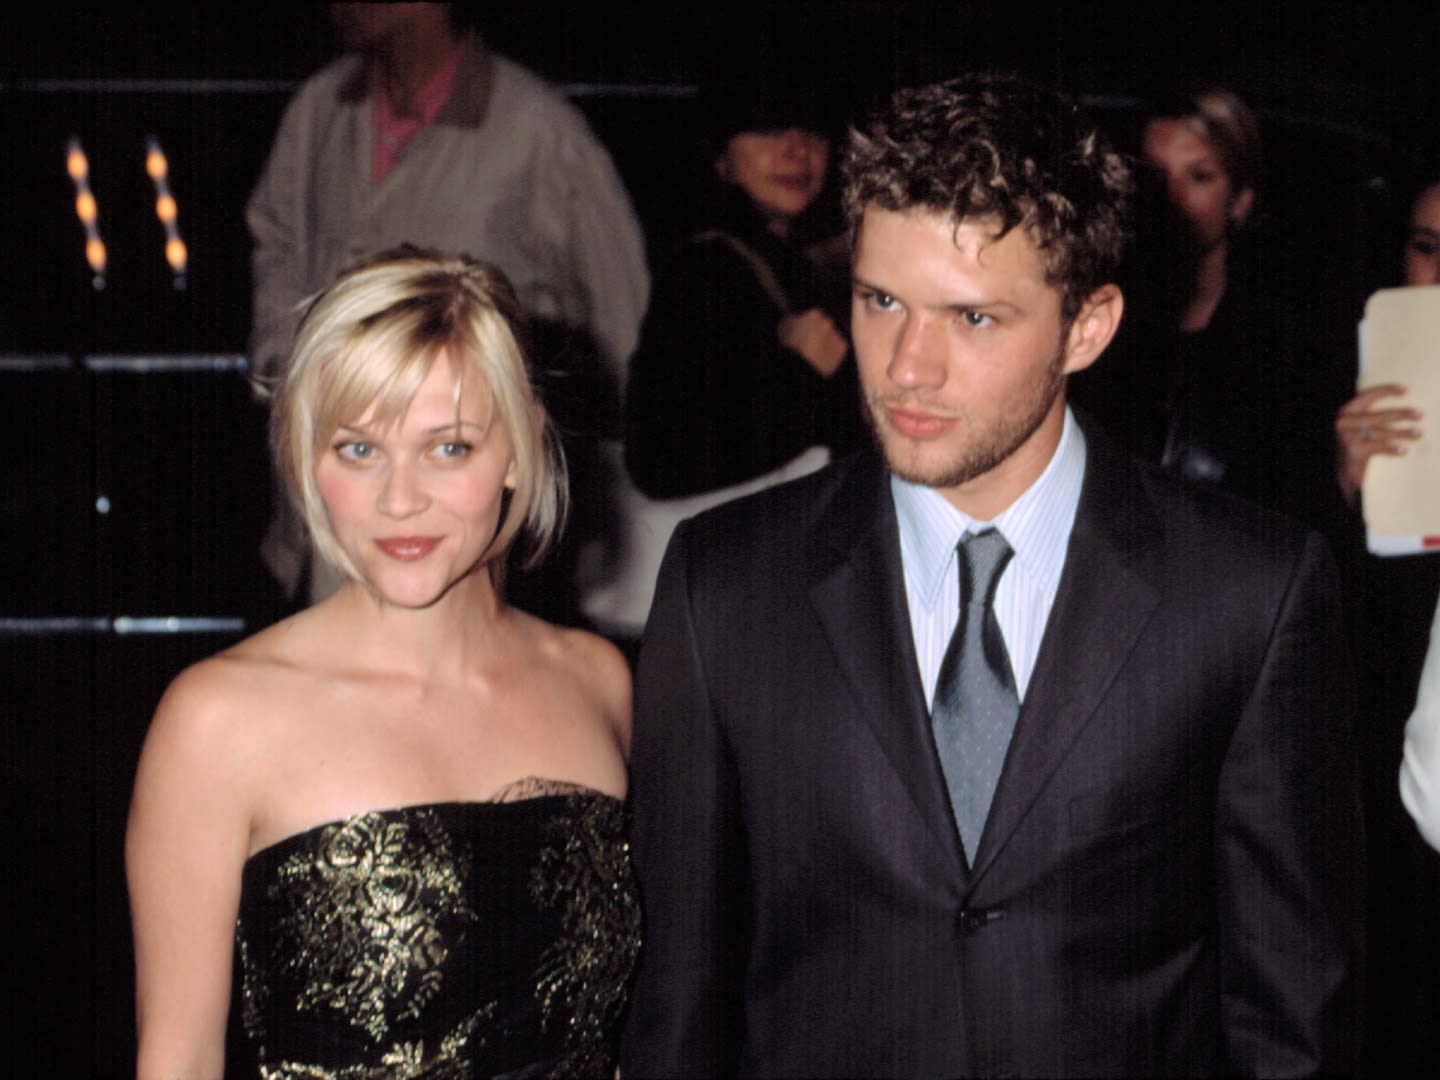 Ryan Phillippe Reese Witherspoon’s Marriage Divorce: Photos